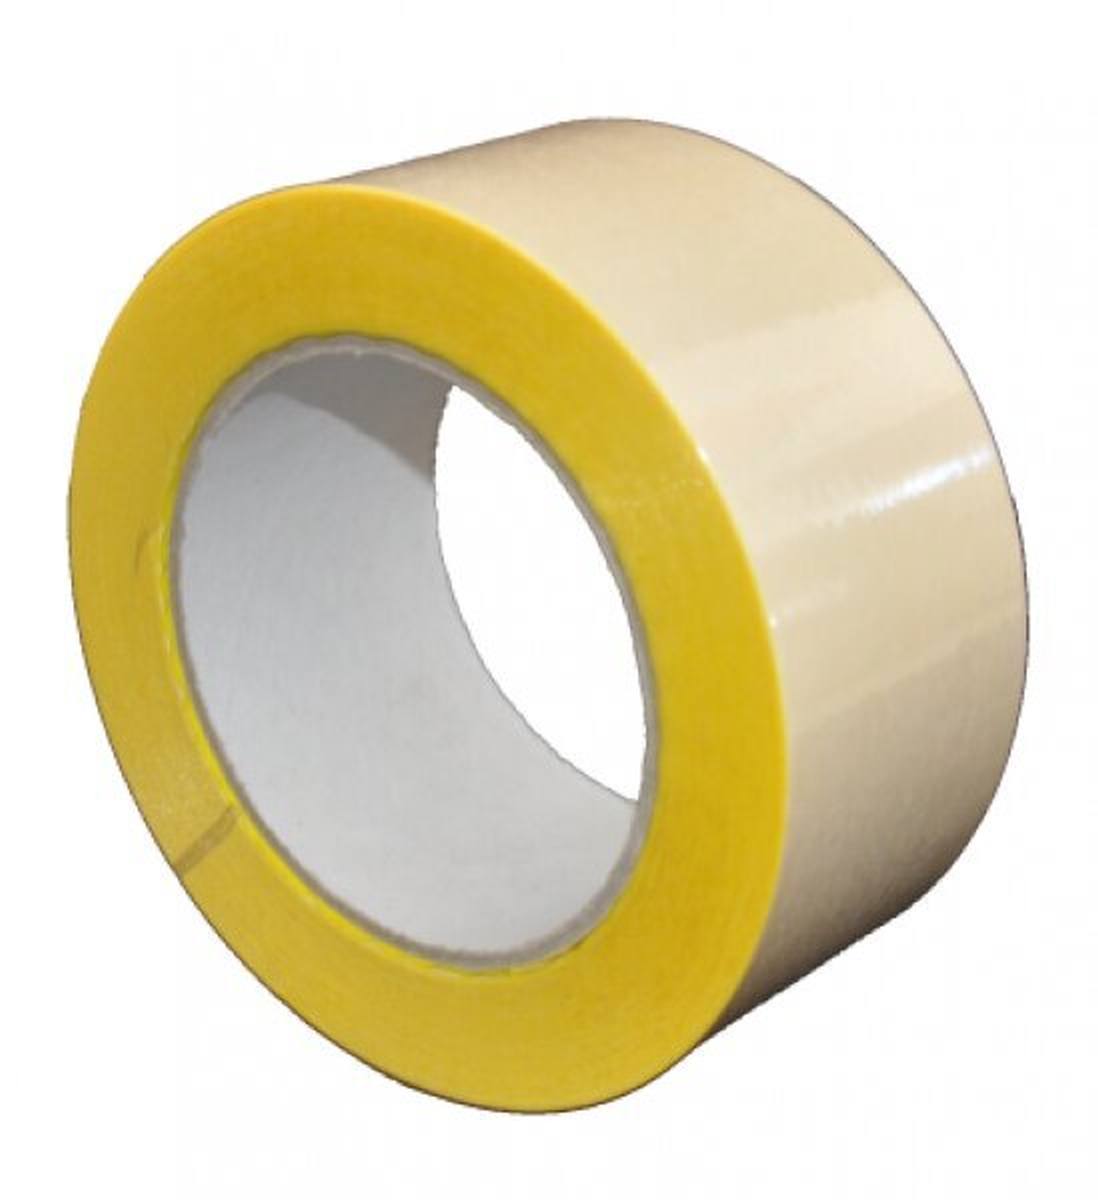 S-K-S 407 Double-sided adhesive tape with polypropylene backing, high / low tack, yellow, 150 mm x 50 m, 0.15 mm